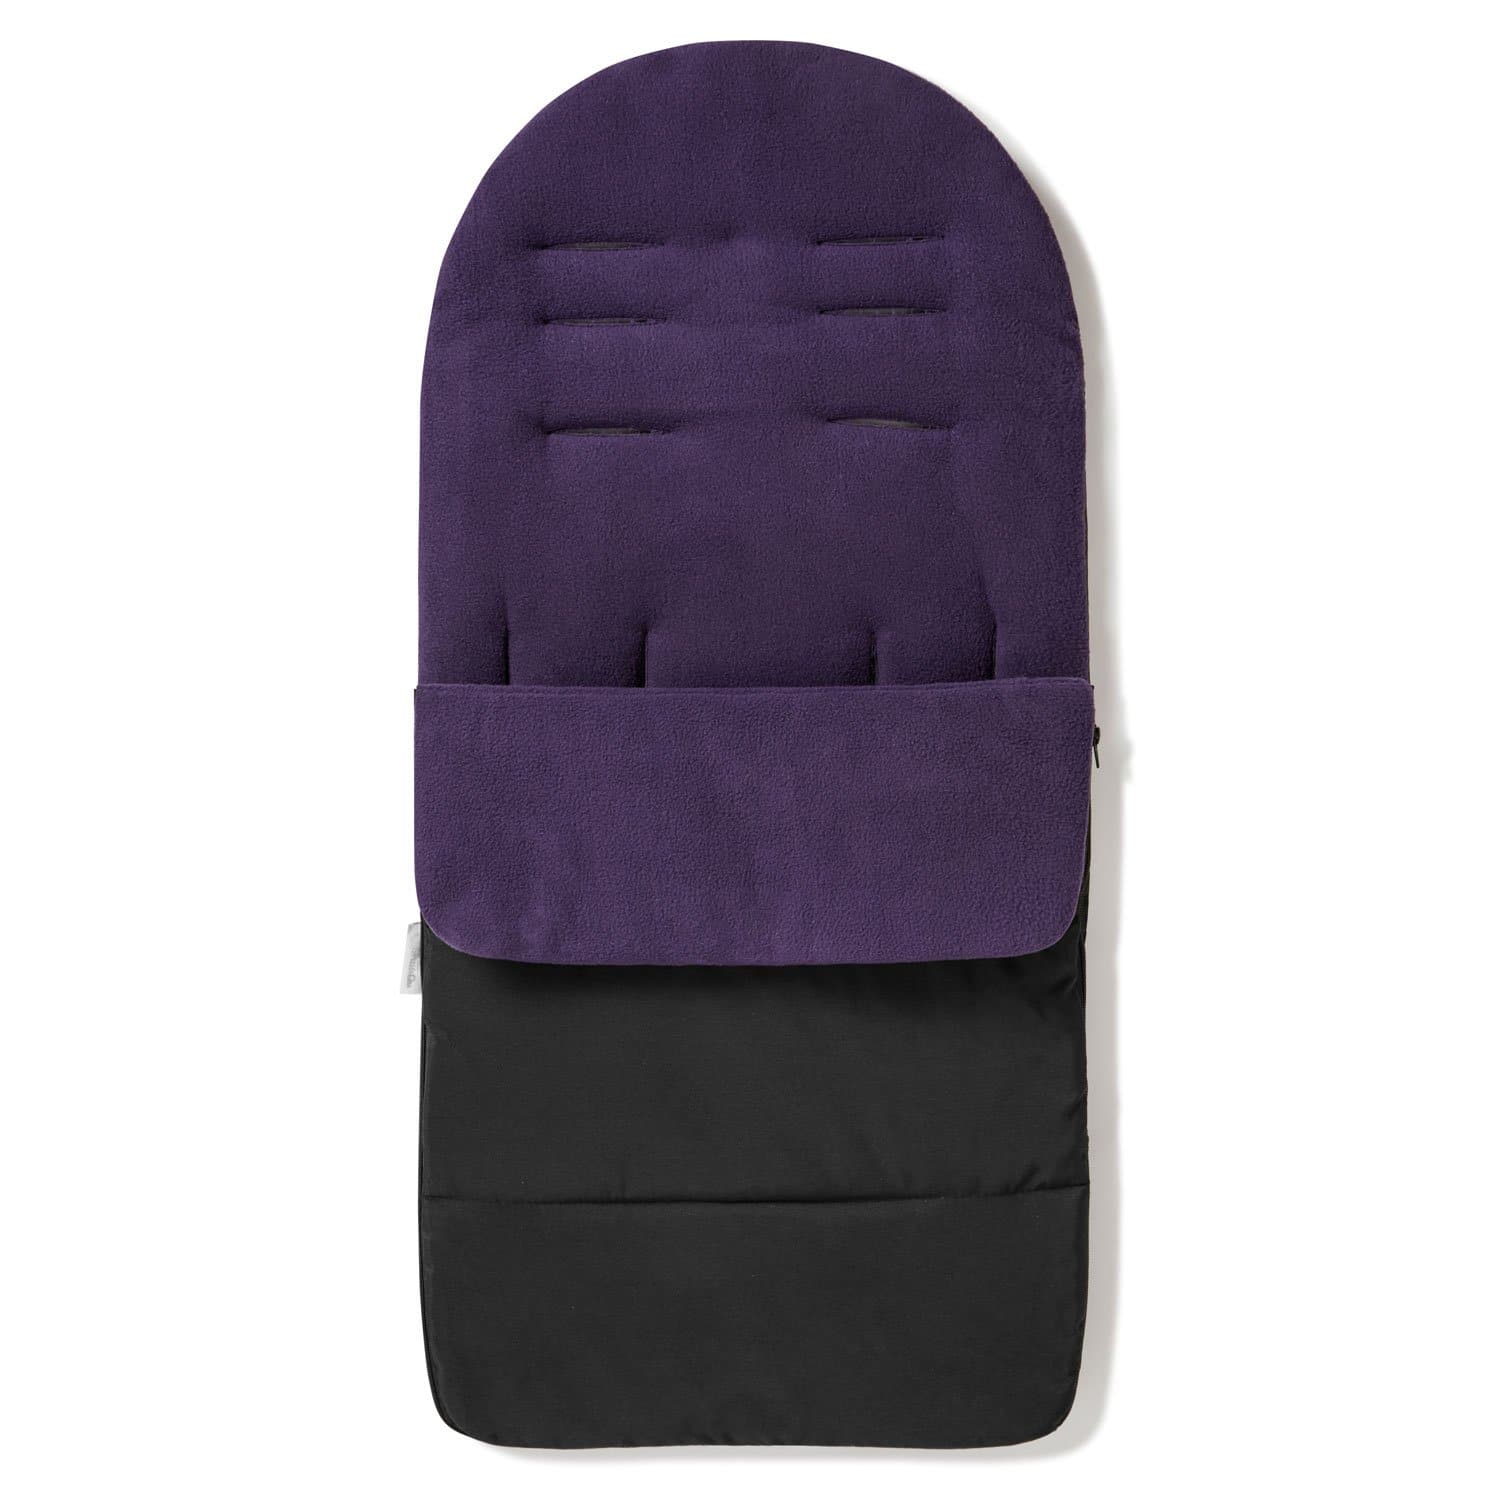 Premium Footmuff / Cosy Toes Compatible with Baby Elegance - Plum Purple / Fits All Models | For Your Little One